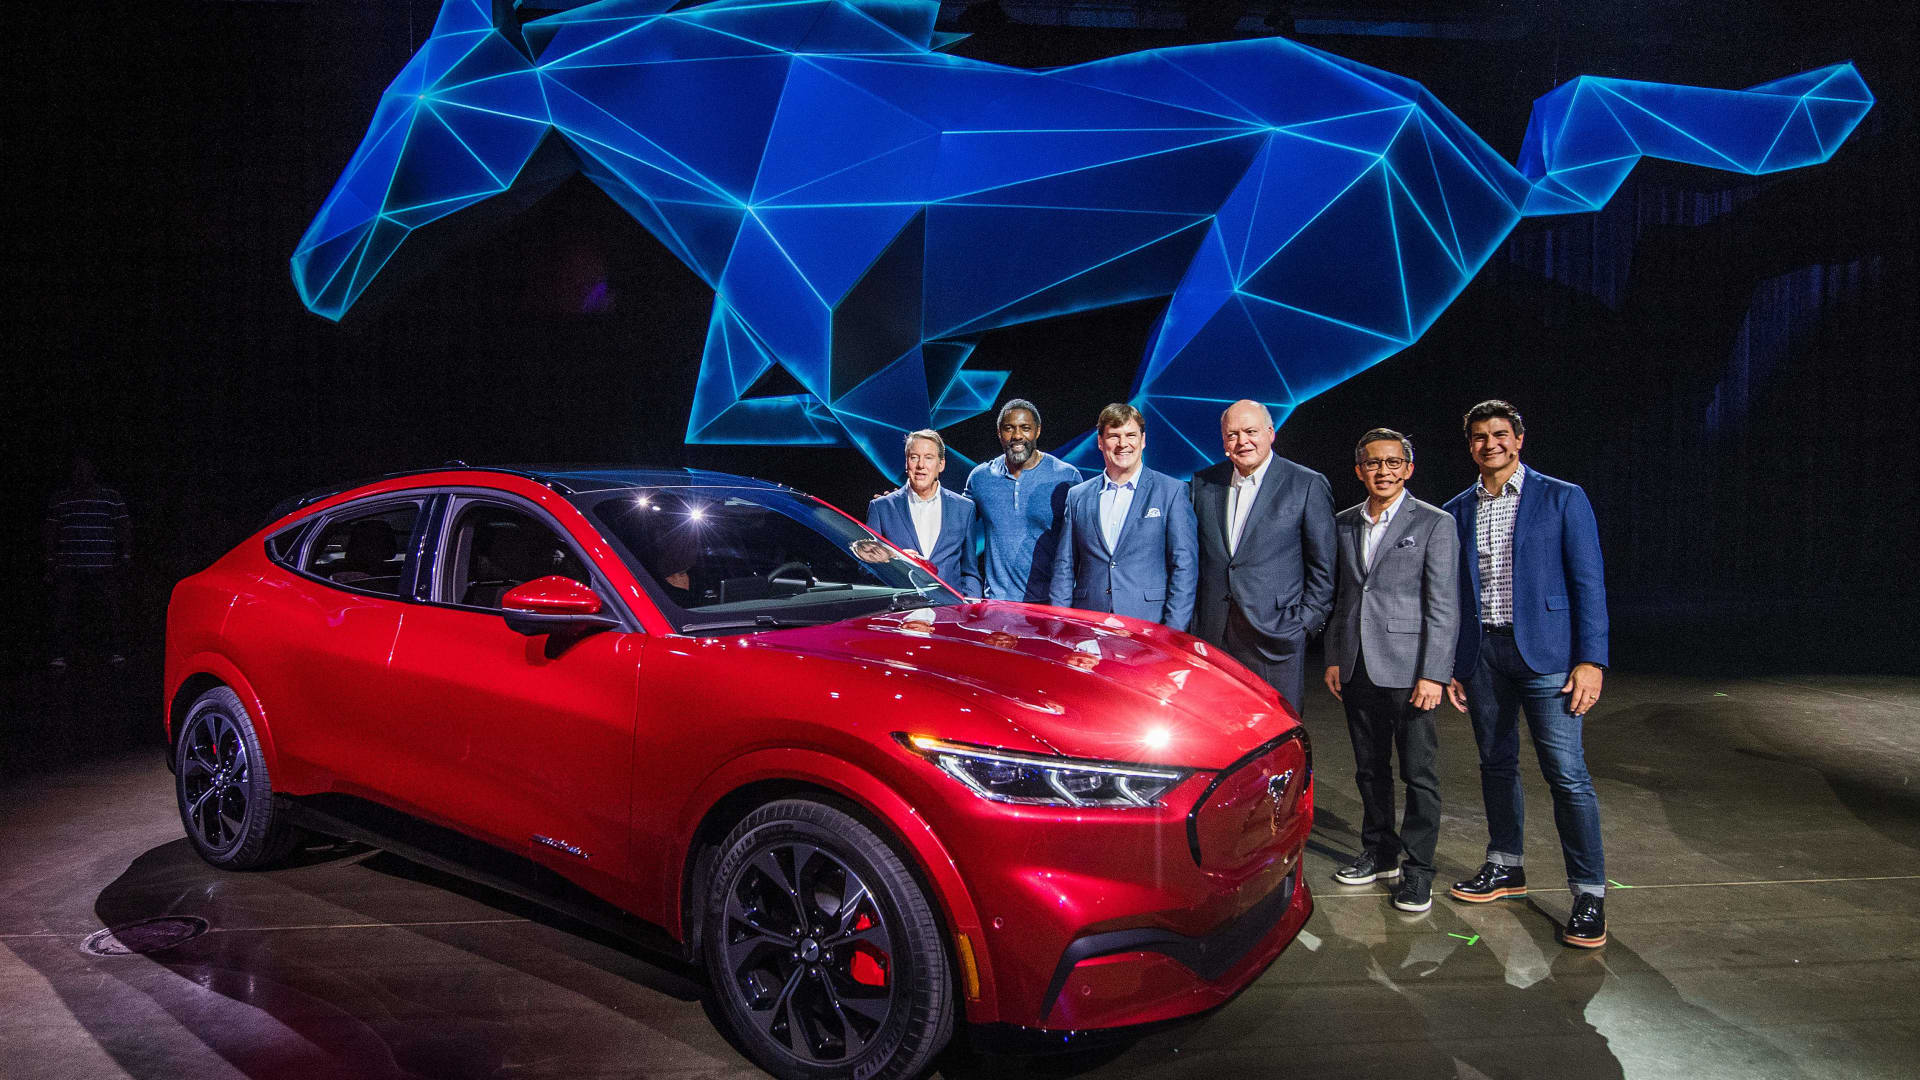 Then-Ford CEO James Hackett (3rd R) and team members, including his successor, Jim Farley (3rd L), reveal the company's first mass-market electric car the Mustang Mach-E, which is an all-electric vehicle that bears the name of the company's iconic muscle car at a ceremony in Hawthorne, California on November 17, 2019.